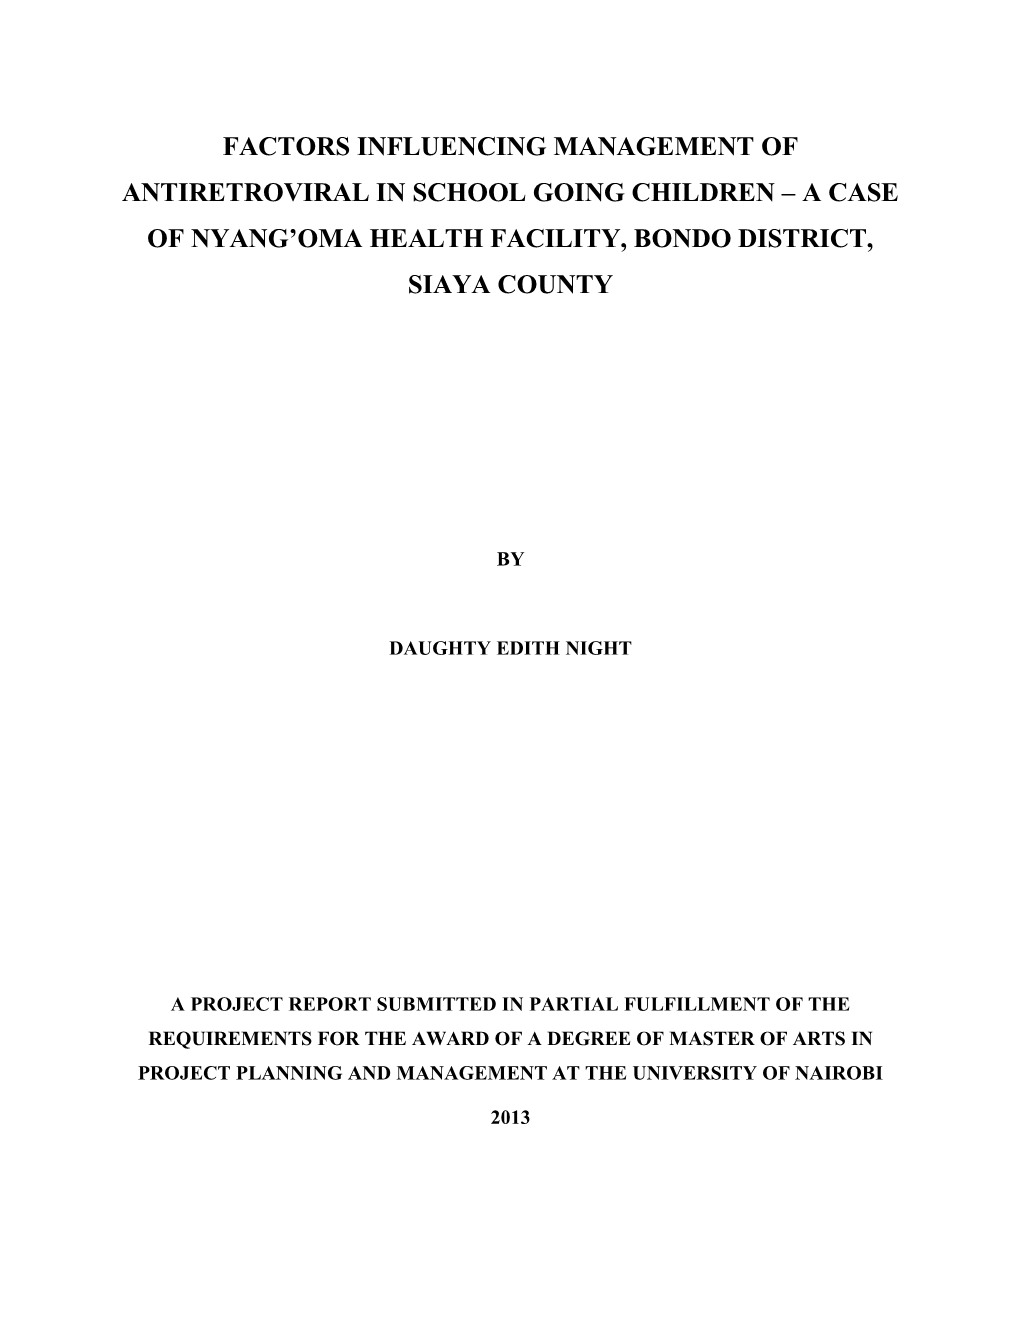 Factors Influencing Management of Antiretroviral in School Going Children – a Case of Nyang’Oma Health Facility, Bondo District, Siaya County